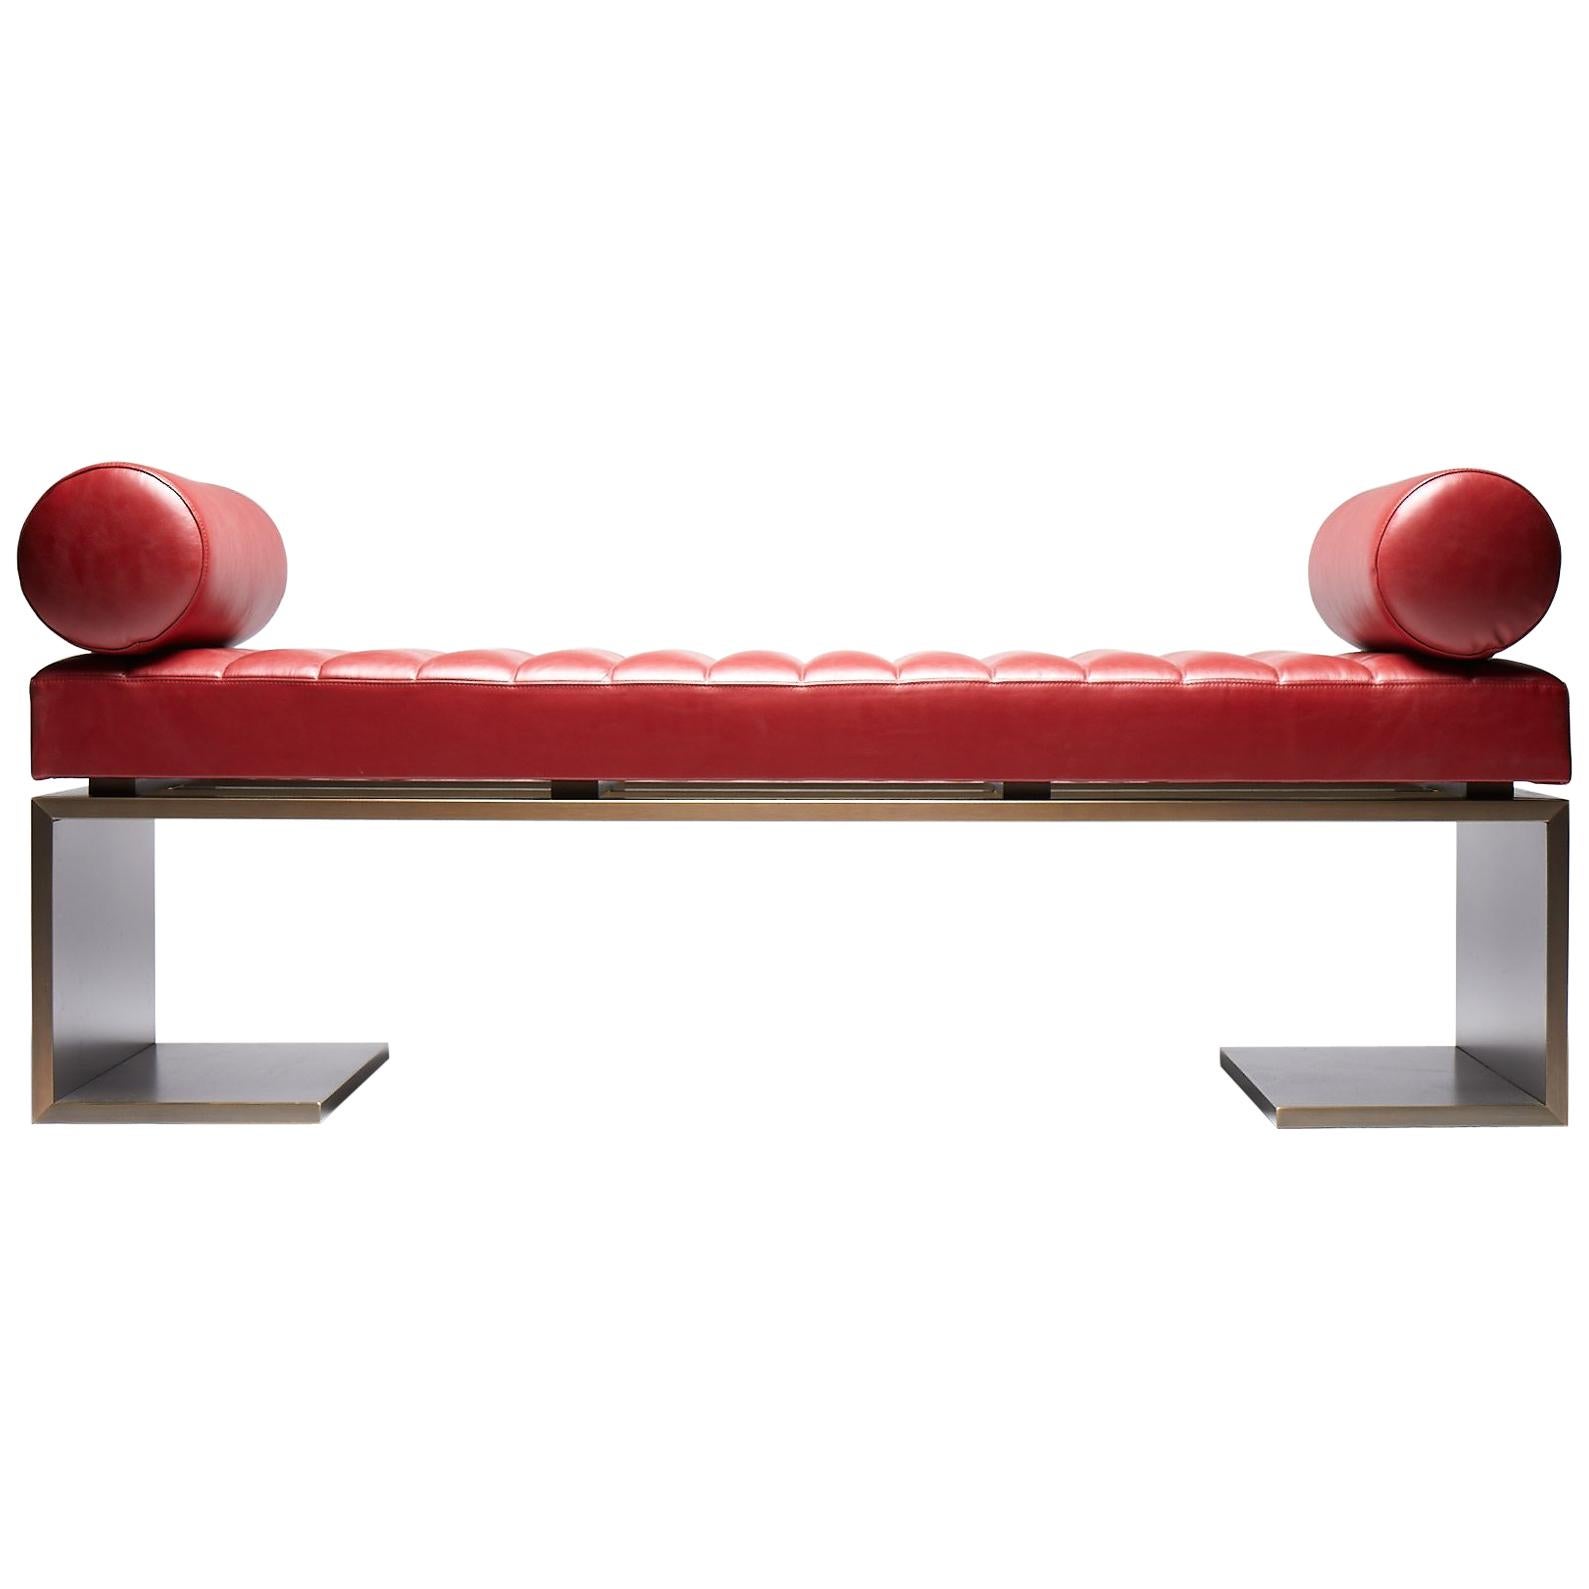 Bronze & Leather Bench, KIMANI, by Reda Amalou Desgin, 2018 - Gallery Collection